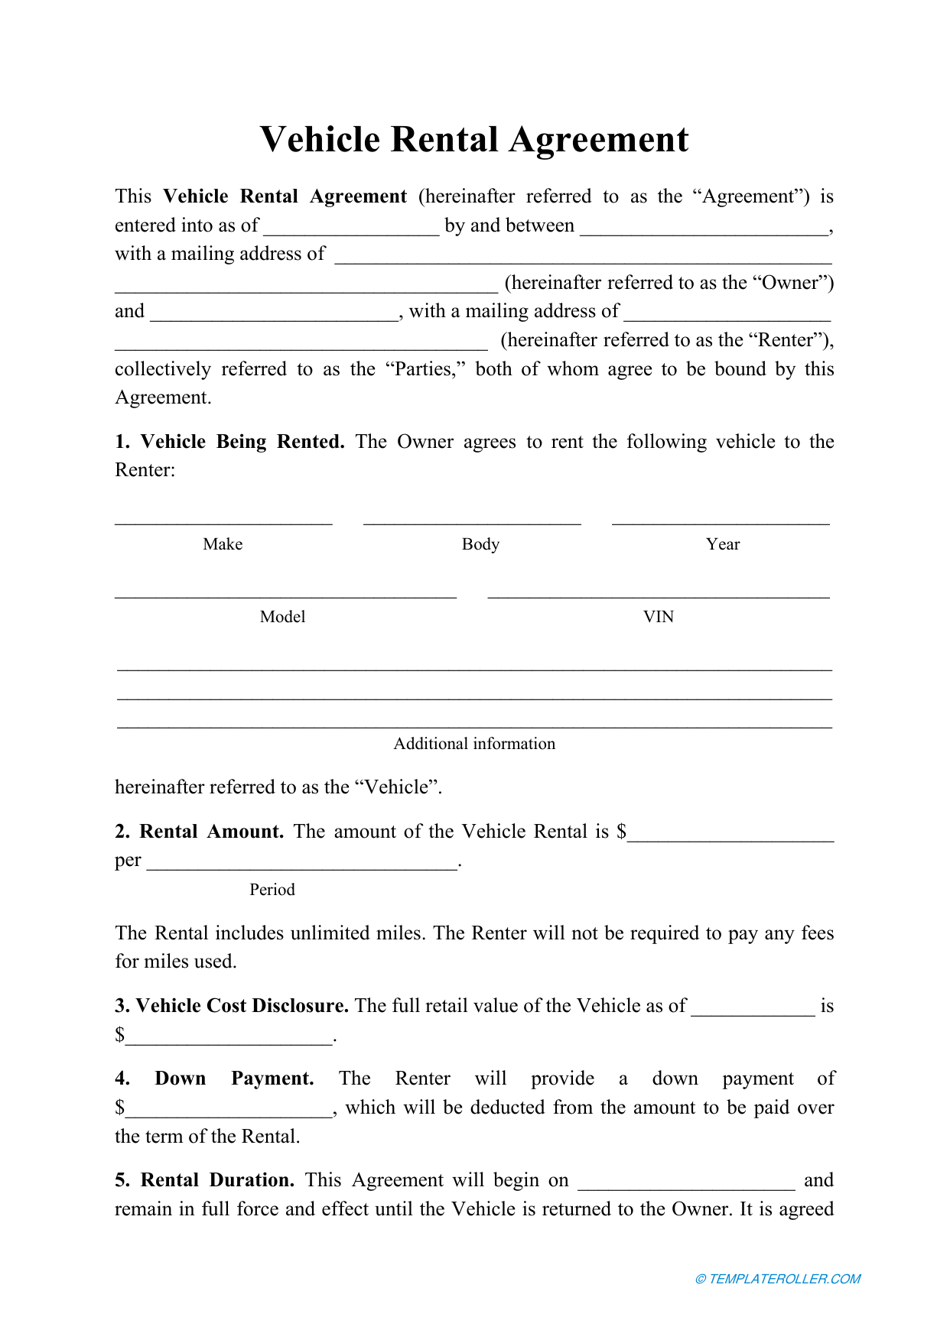 Vehicle Rental Agreement Template Download Printable PDF With car hire agreement template